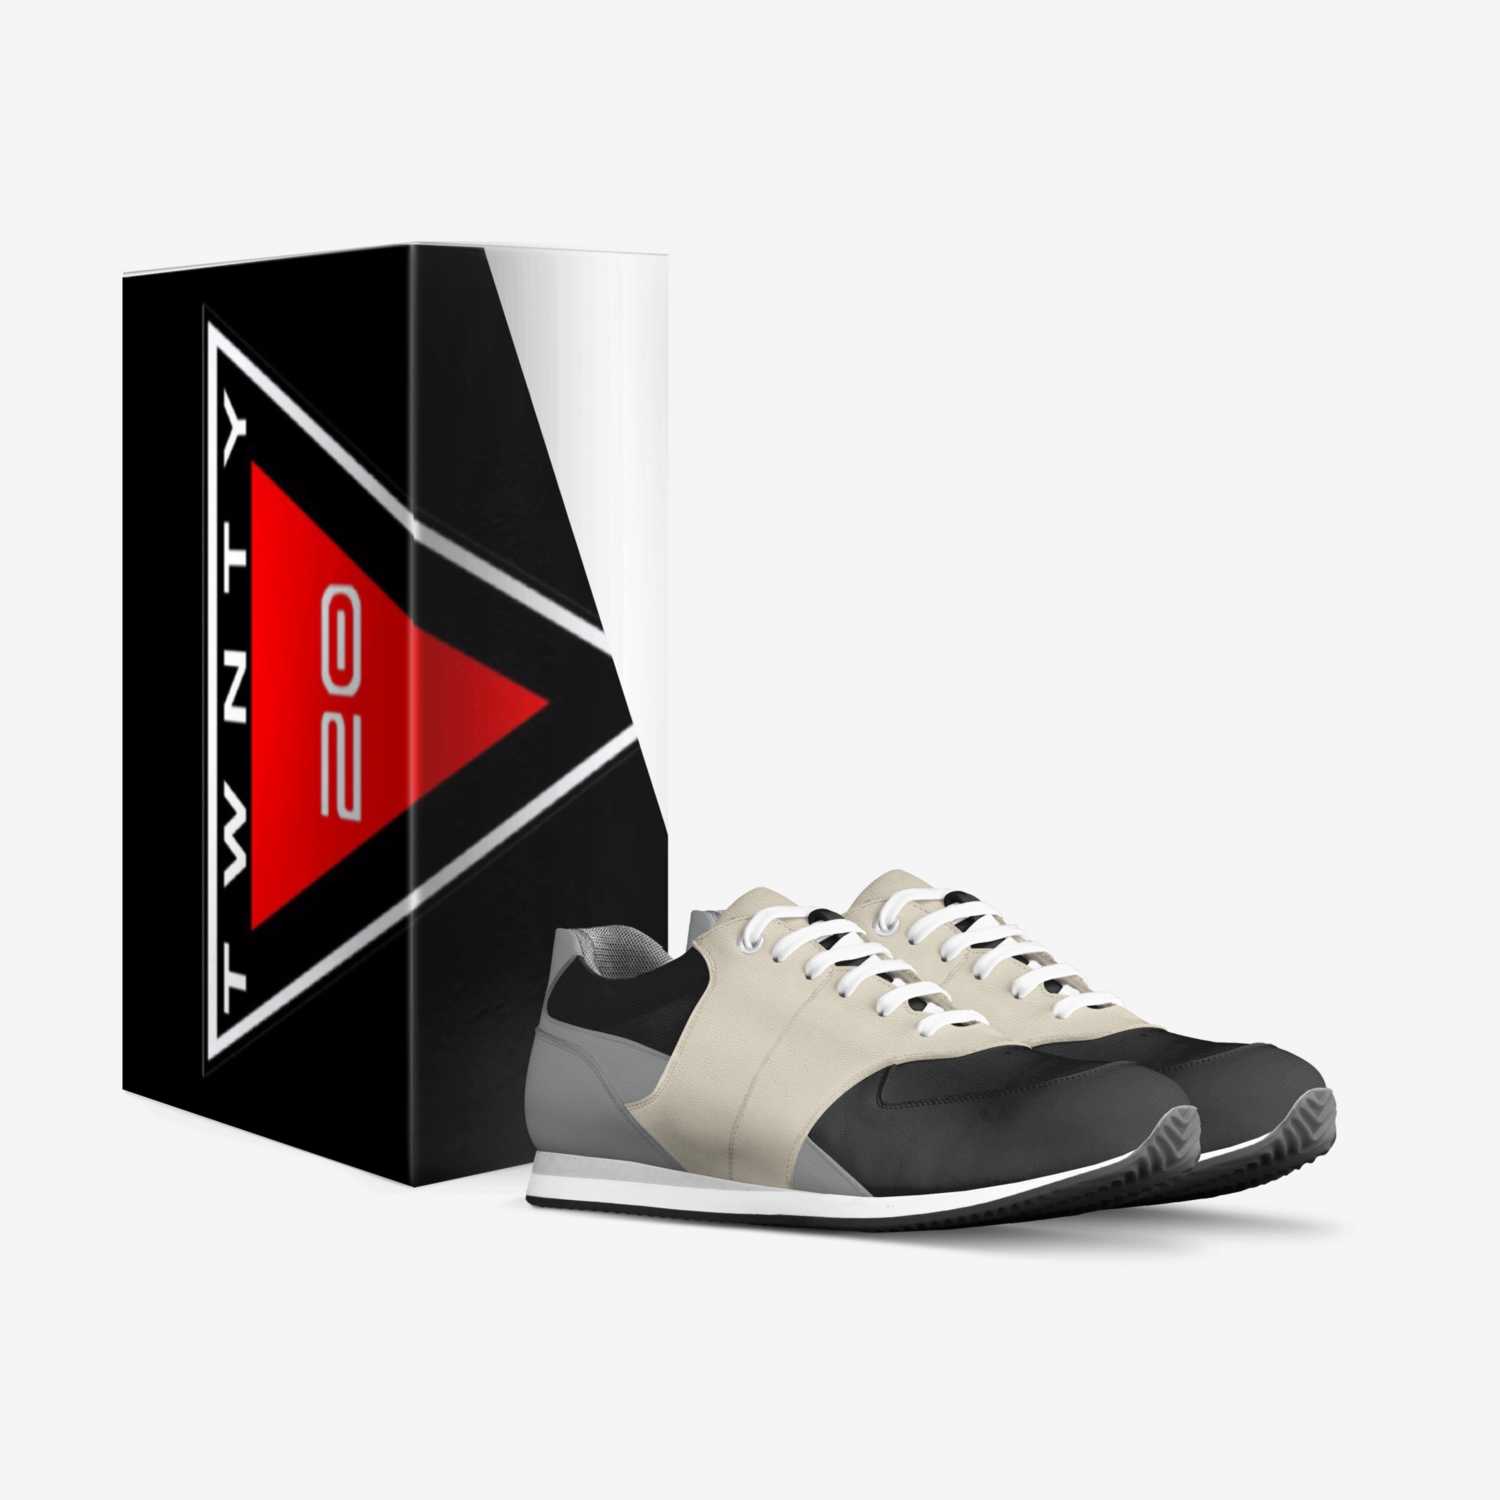 LXR 120  custom made in Italy shoes by Kvn Elvn | Box view